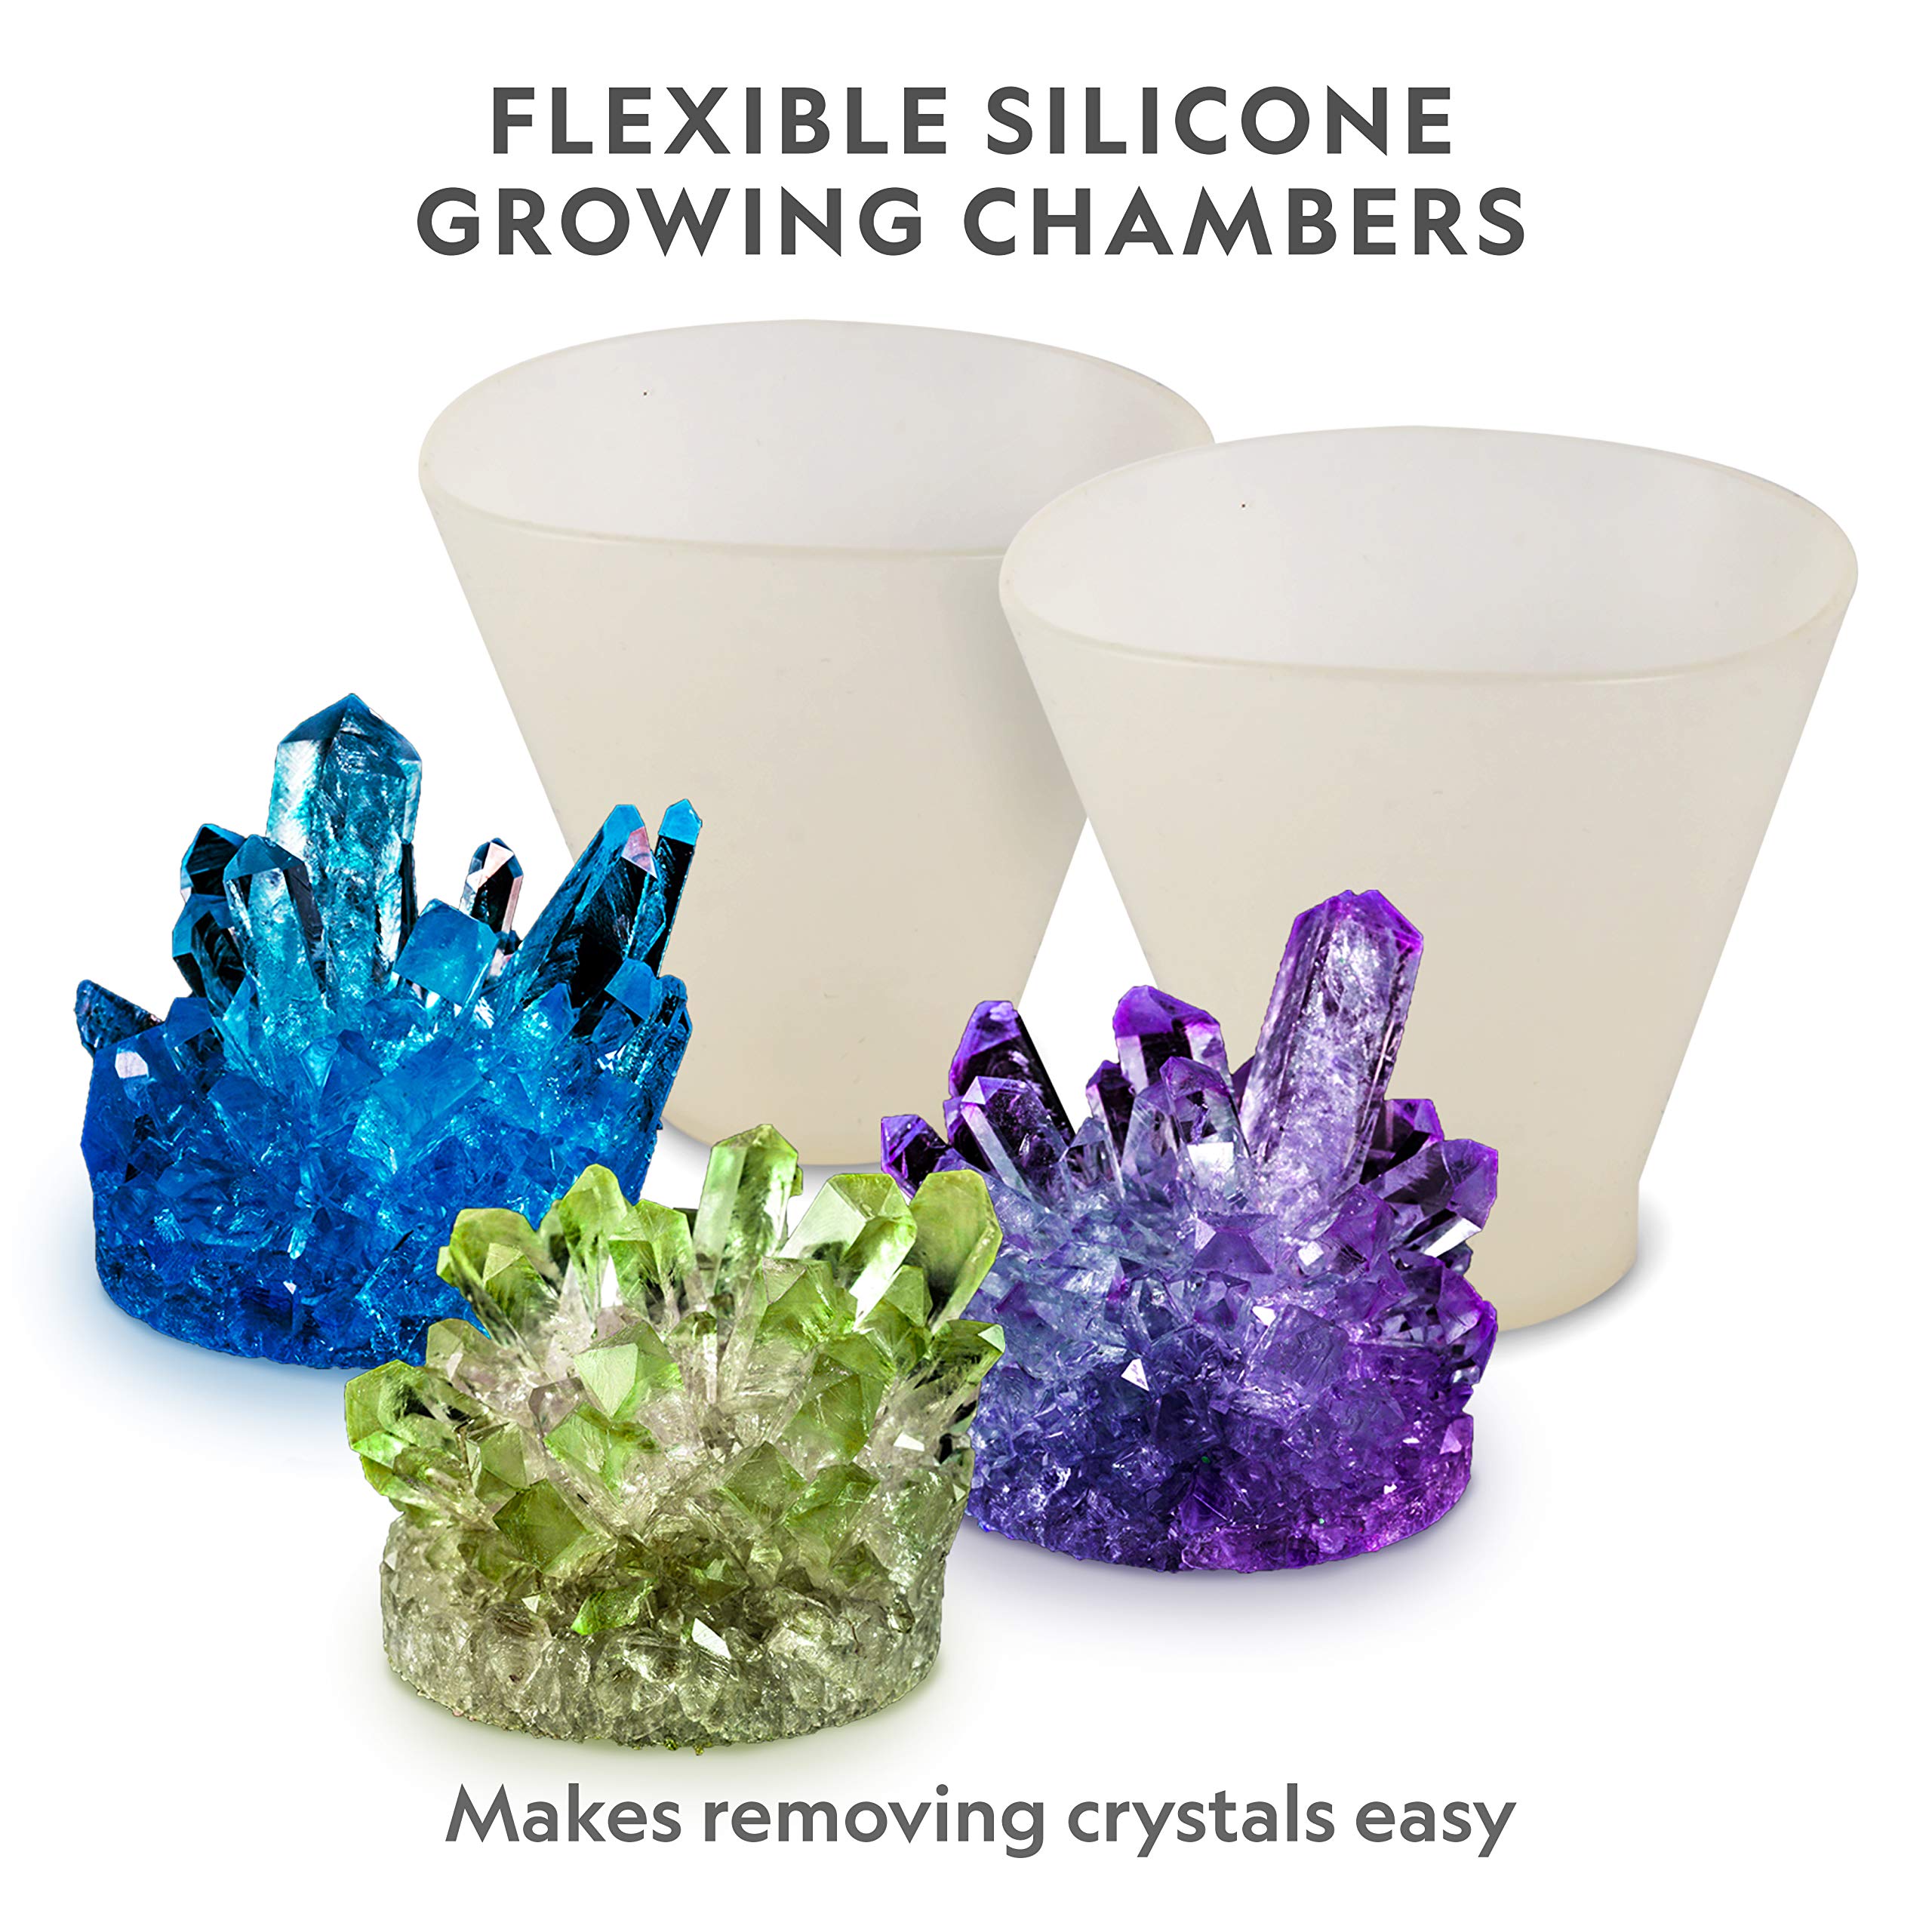 NATIONAL GEOGRAPHIC Mega Crystal Growing Kit for Kids- Grow 8 Vibrant Crystals Fast (3-4 Days), with Light-Up Display Stand and Real Gemstones, Crystal Making Science Kit (Amazon Exclusive)